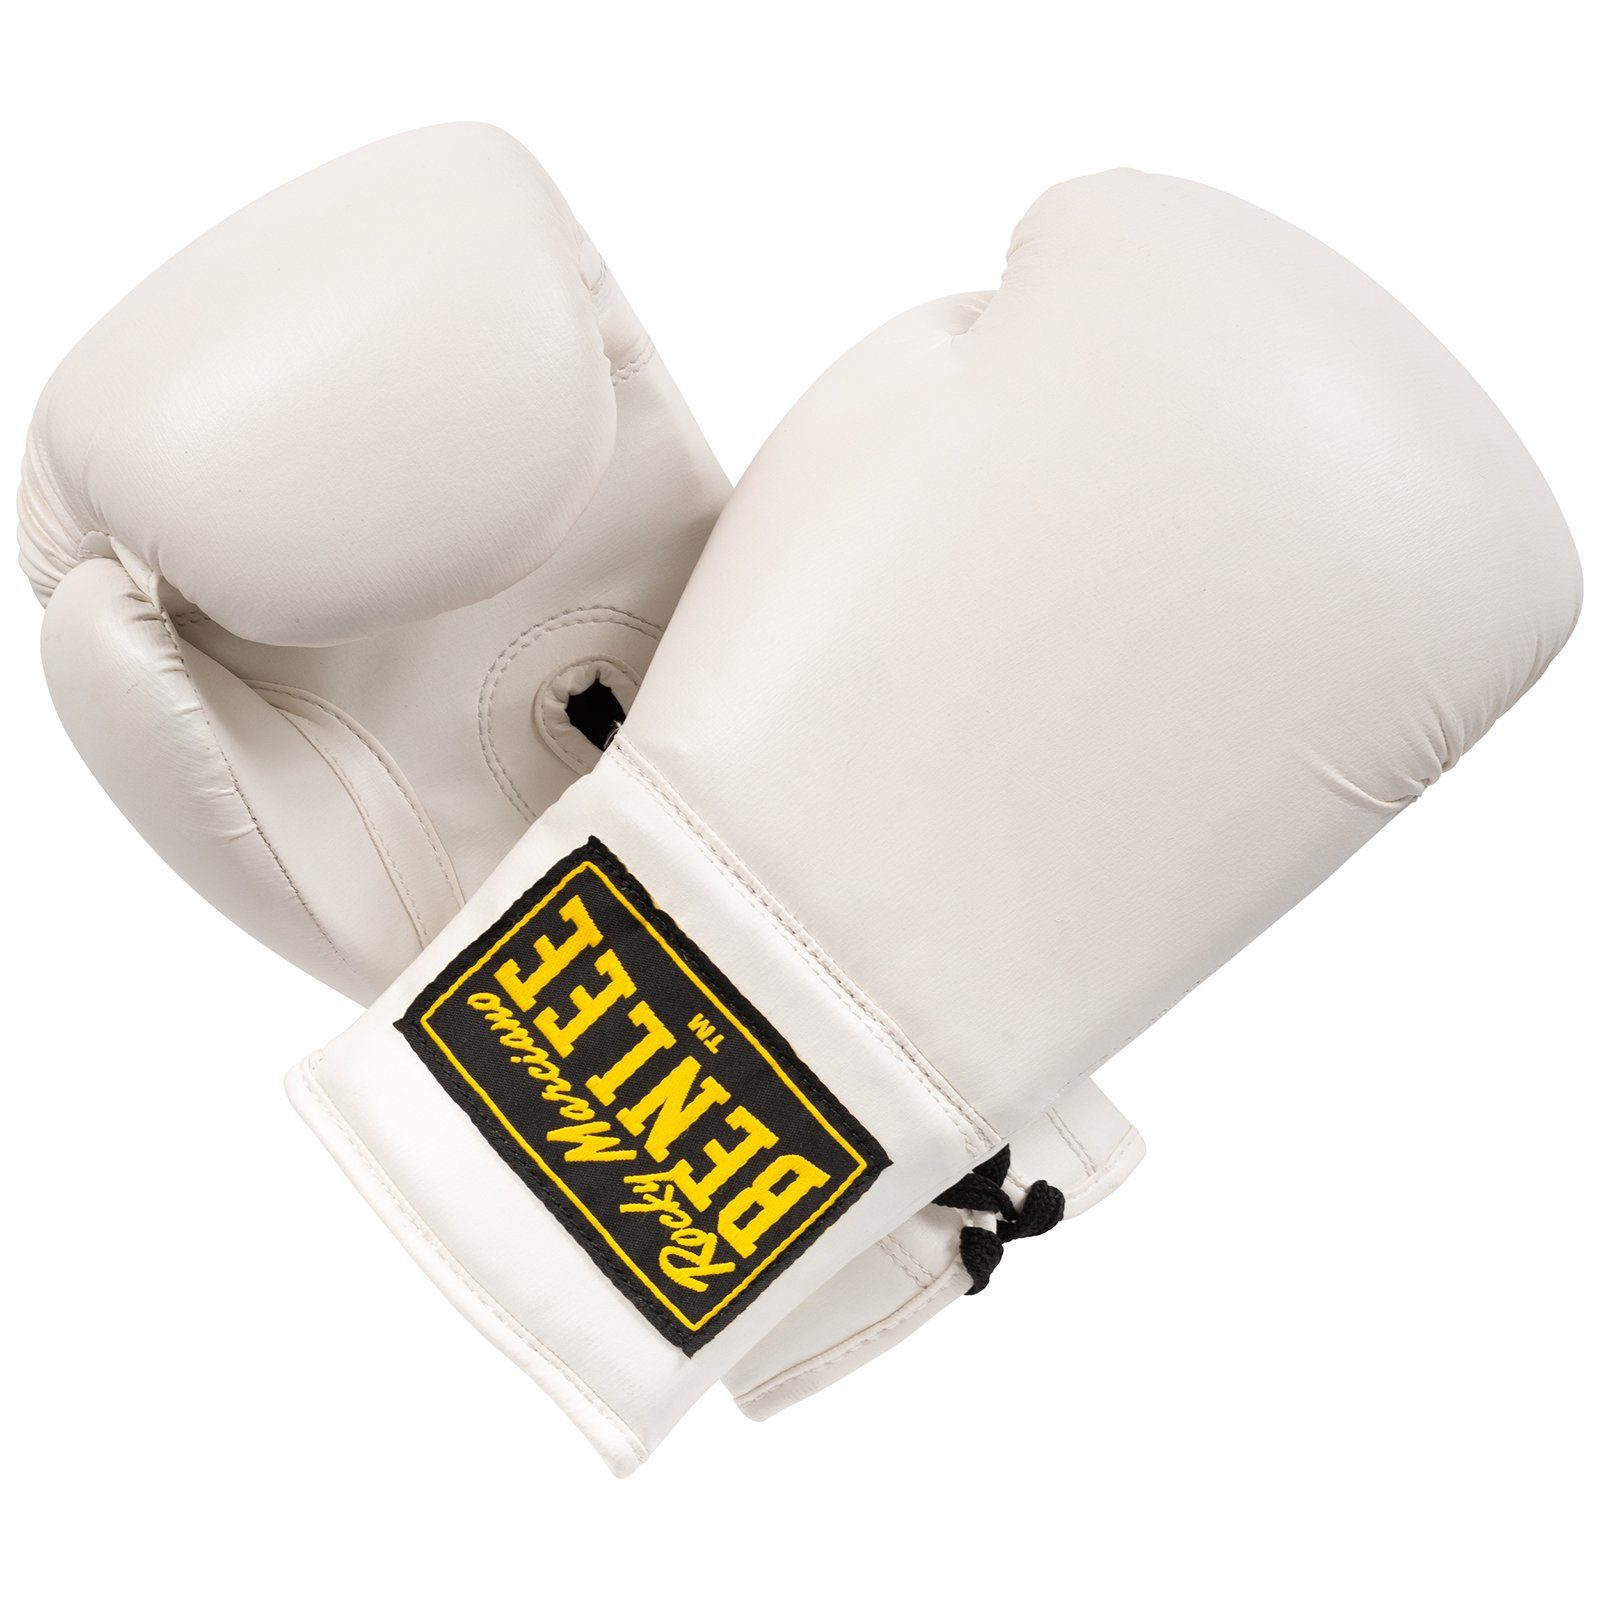 Benlee Rocky Marciano Boxhandschuhe GLOVES AUTOGRAPH White